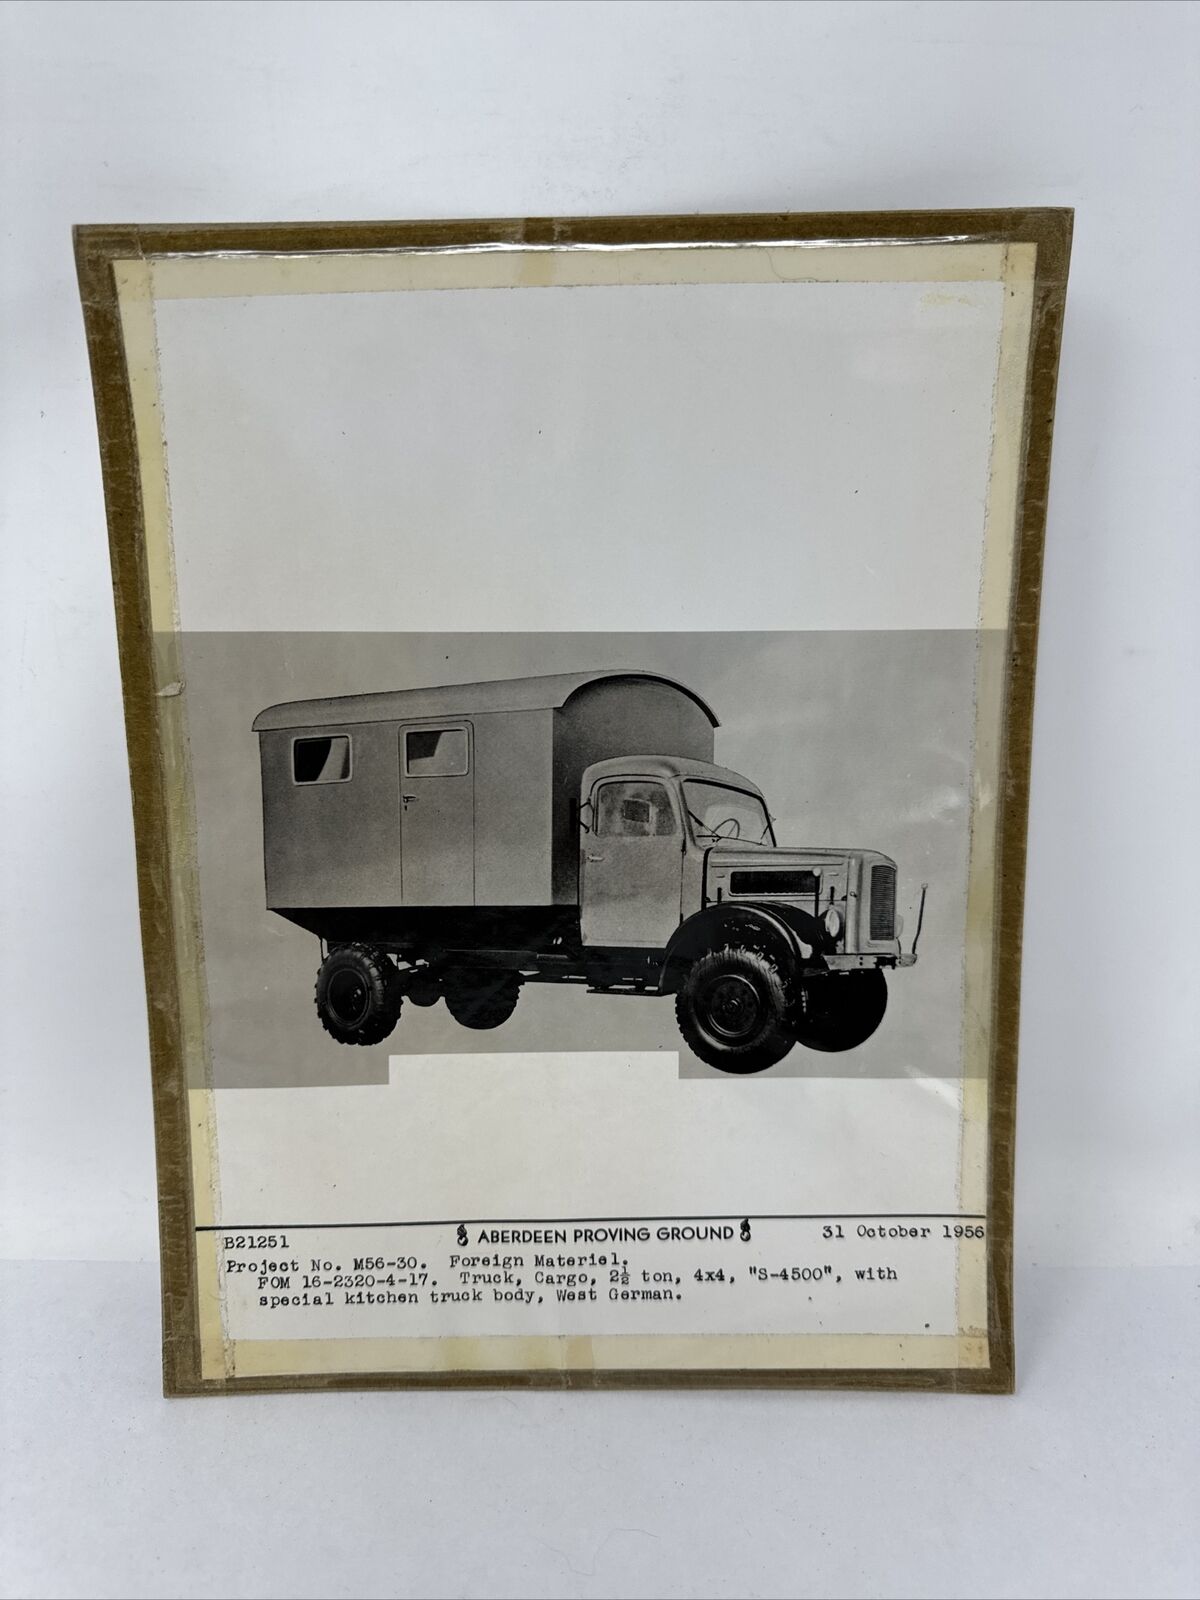 1956 Real Photo Army Truck Aberdeen Proving Ground Official Specs Vintage